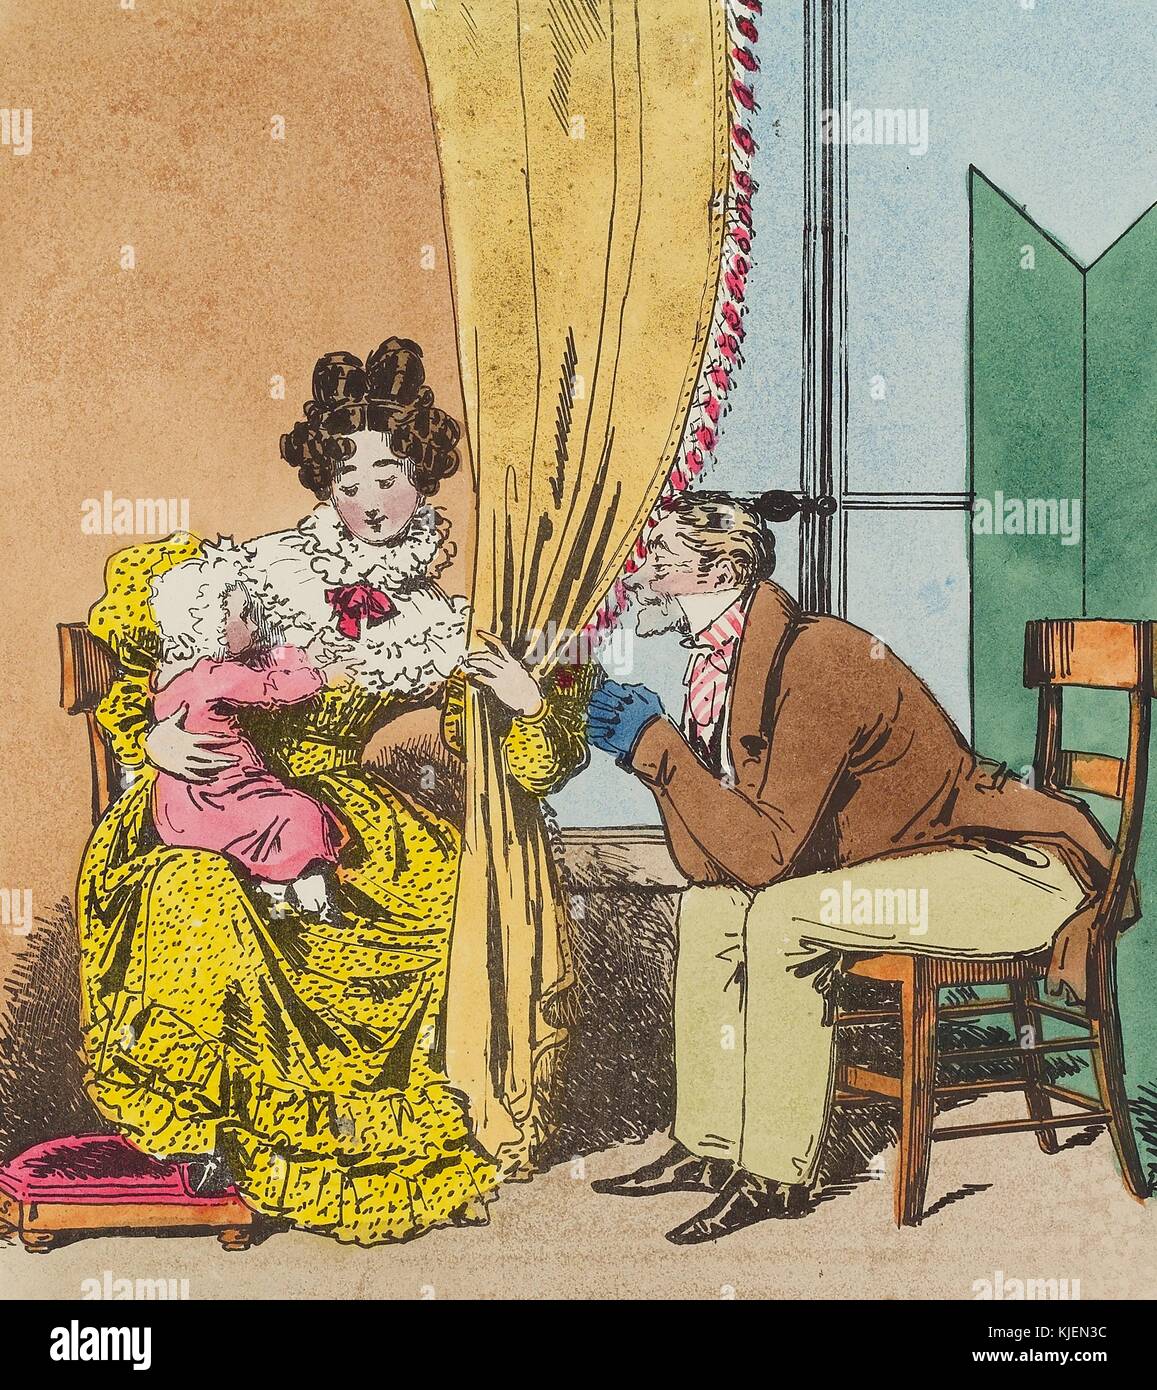 A lithograph entitled Maternal Care, a woman is holding an infant on her lap while she uses a curtain to help the man playing peekaboo with the child, the woman wears a yellow dress while the man is in a brown jacket and tan pants, 1849. From the New York Public Library. Stock Photo